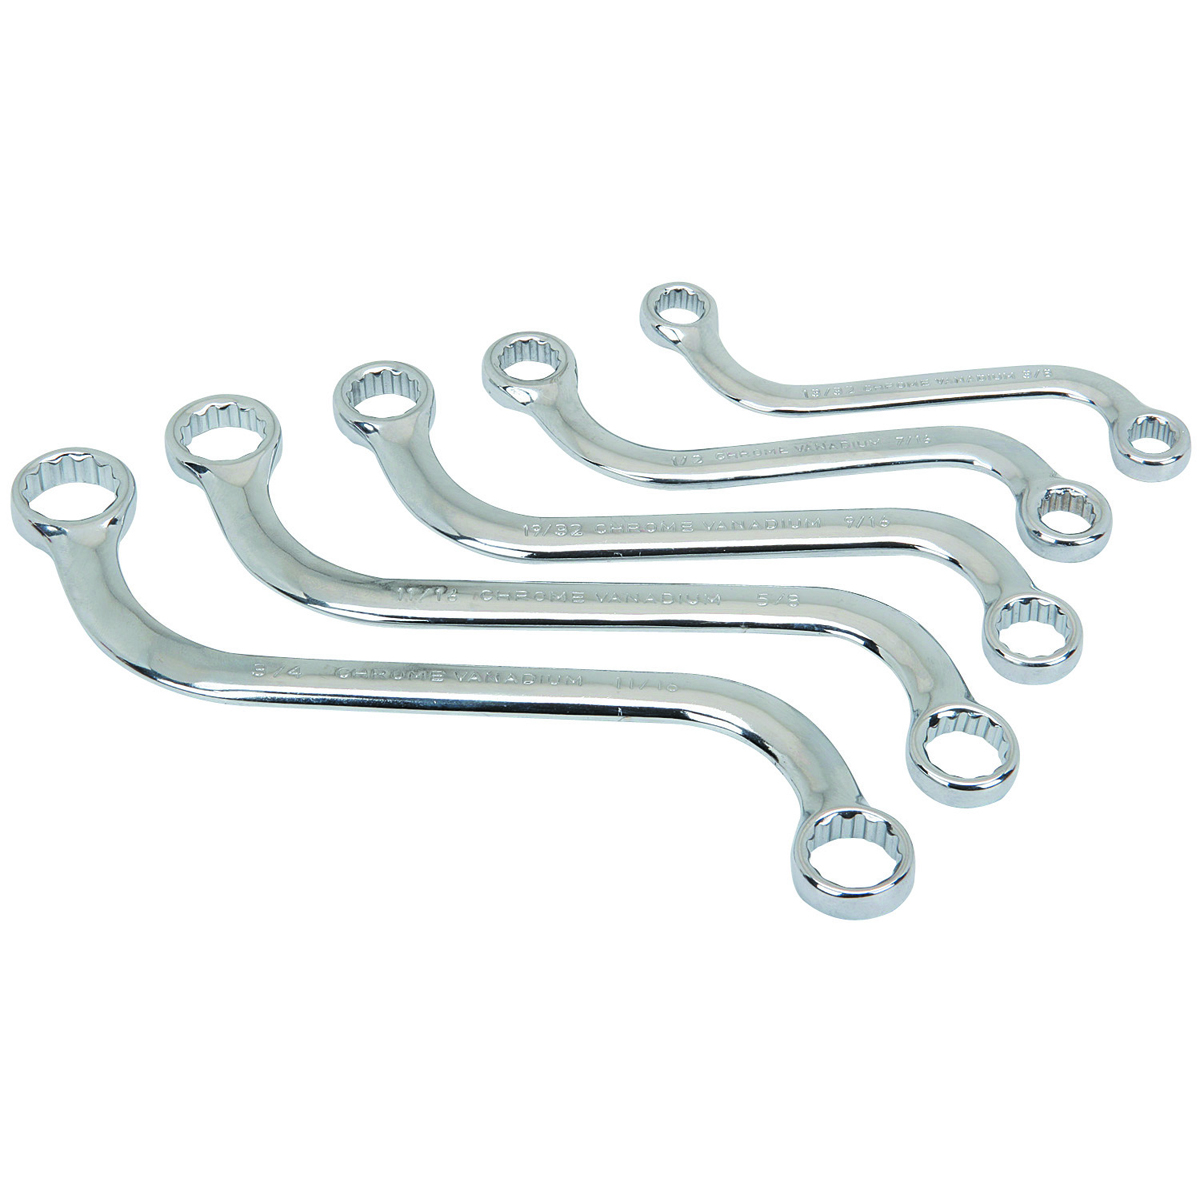 PITTSBURGH SAE S-Type Obstruction Wrench Set 5 Pc. - Item 99700